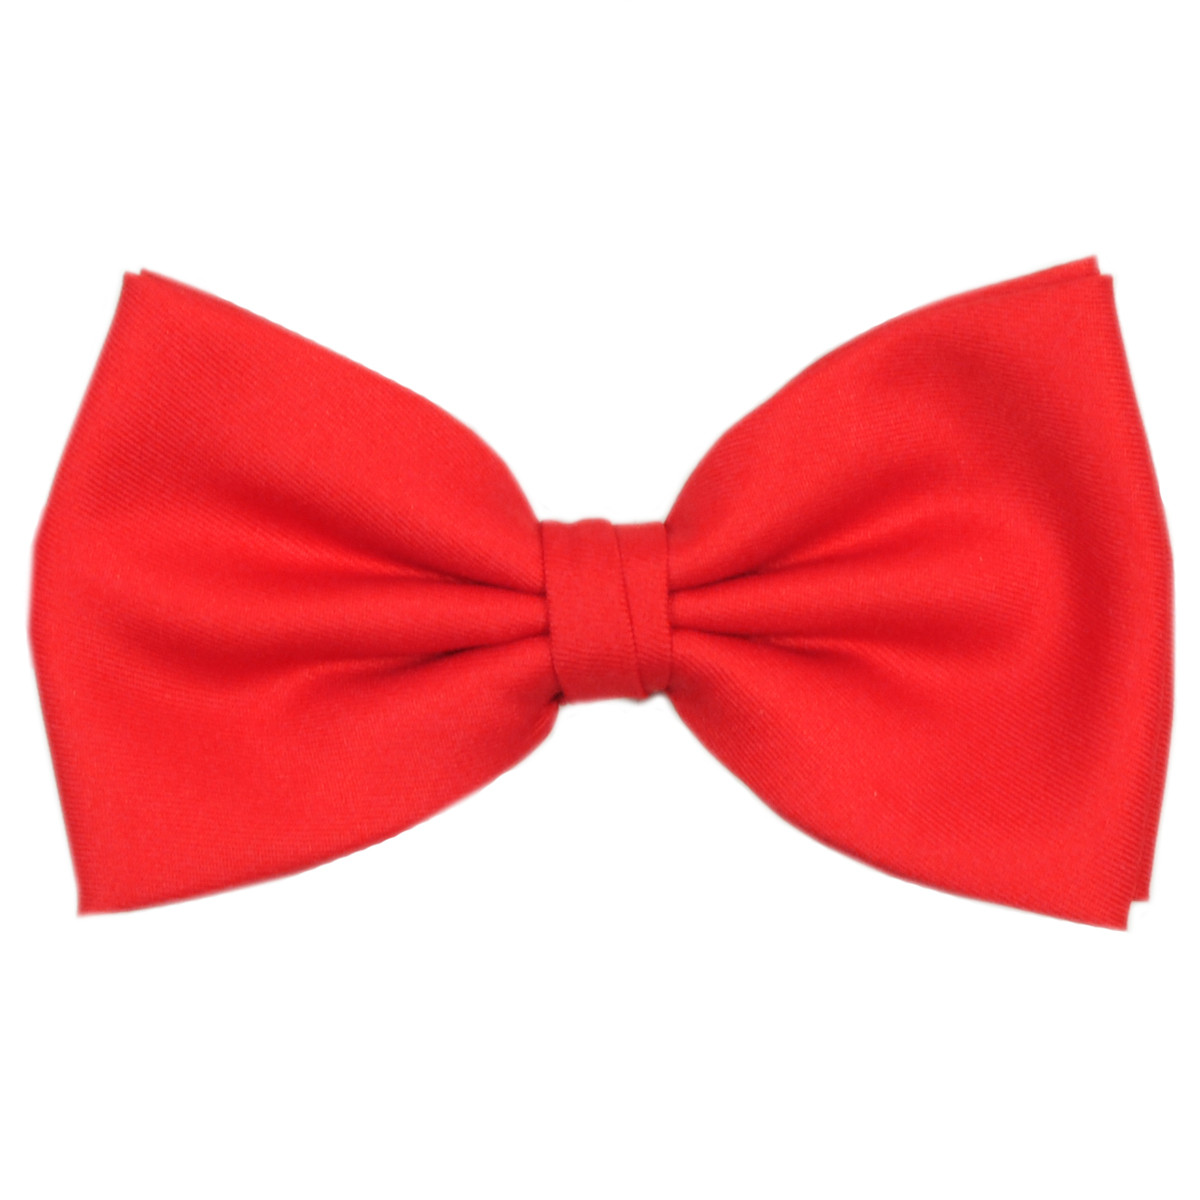 Red bow tie clipart no background